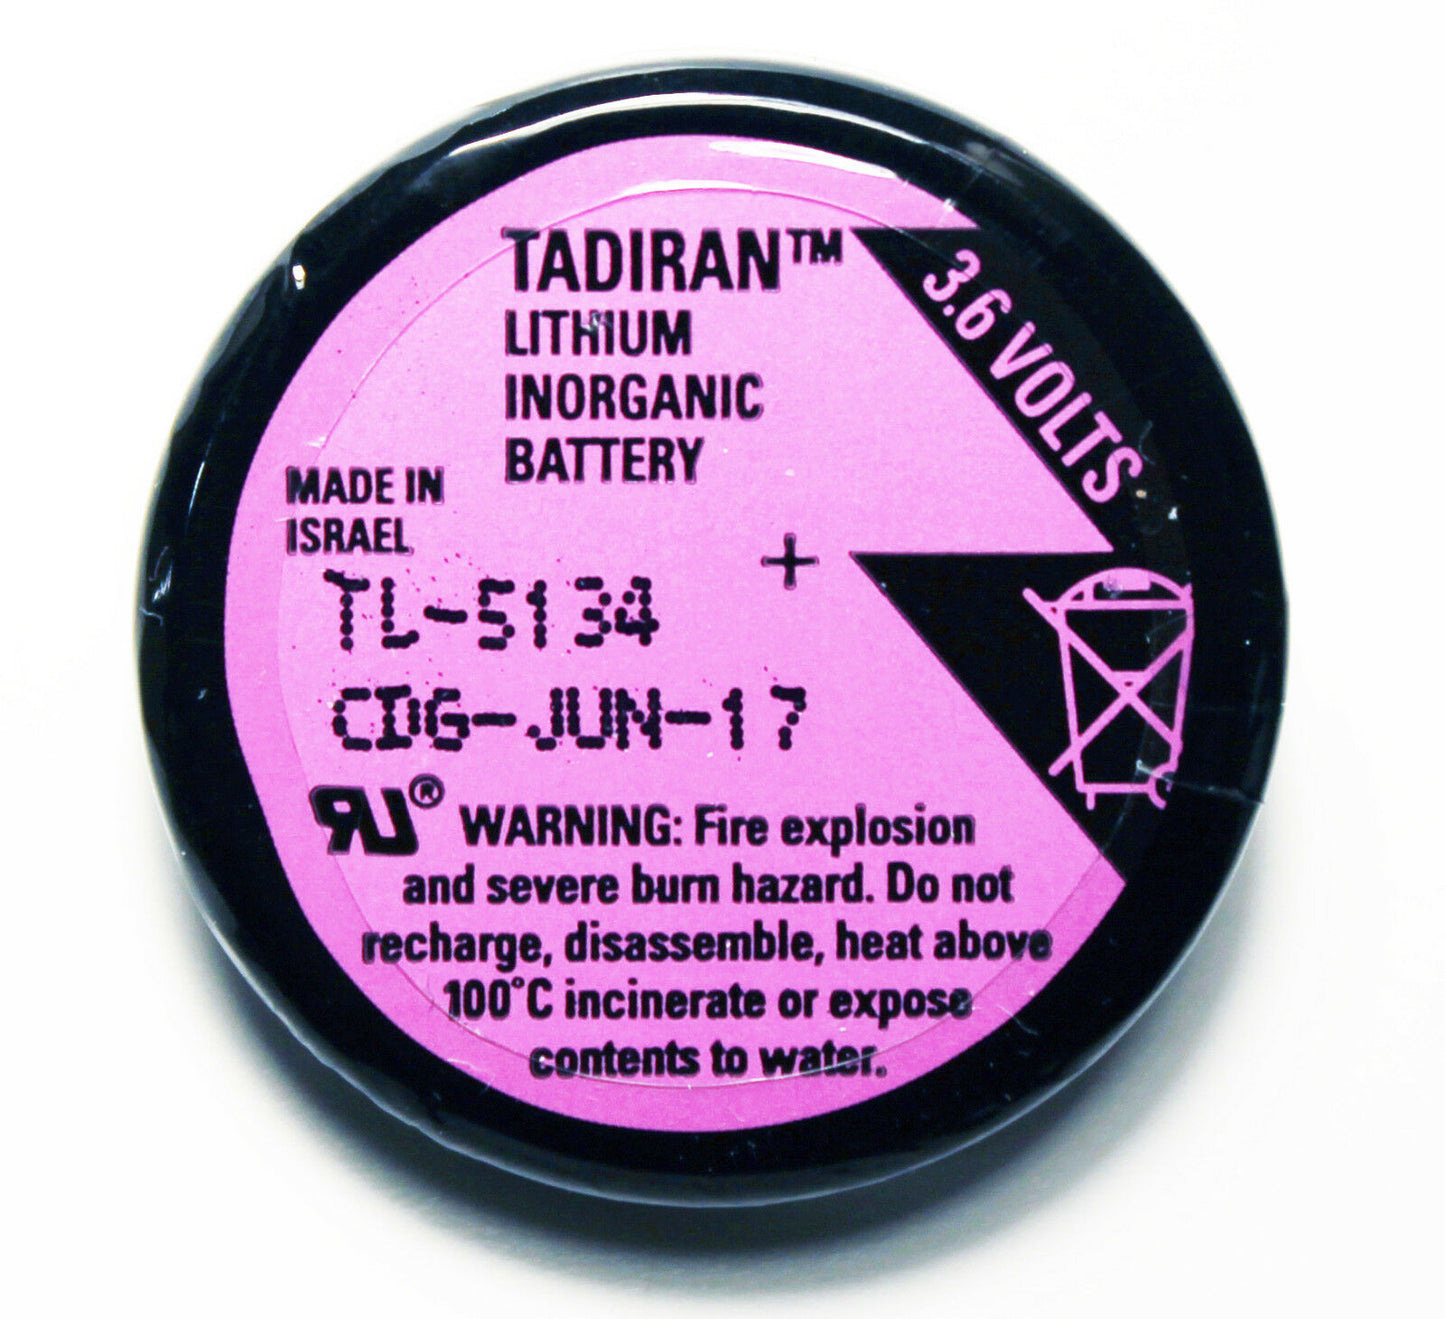 Tadiran TL-5134 Lithium Wafer Cell for Industrial & Memory Applications, TL 5134, 3.6V, 3PC Pins